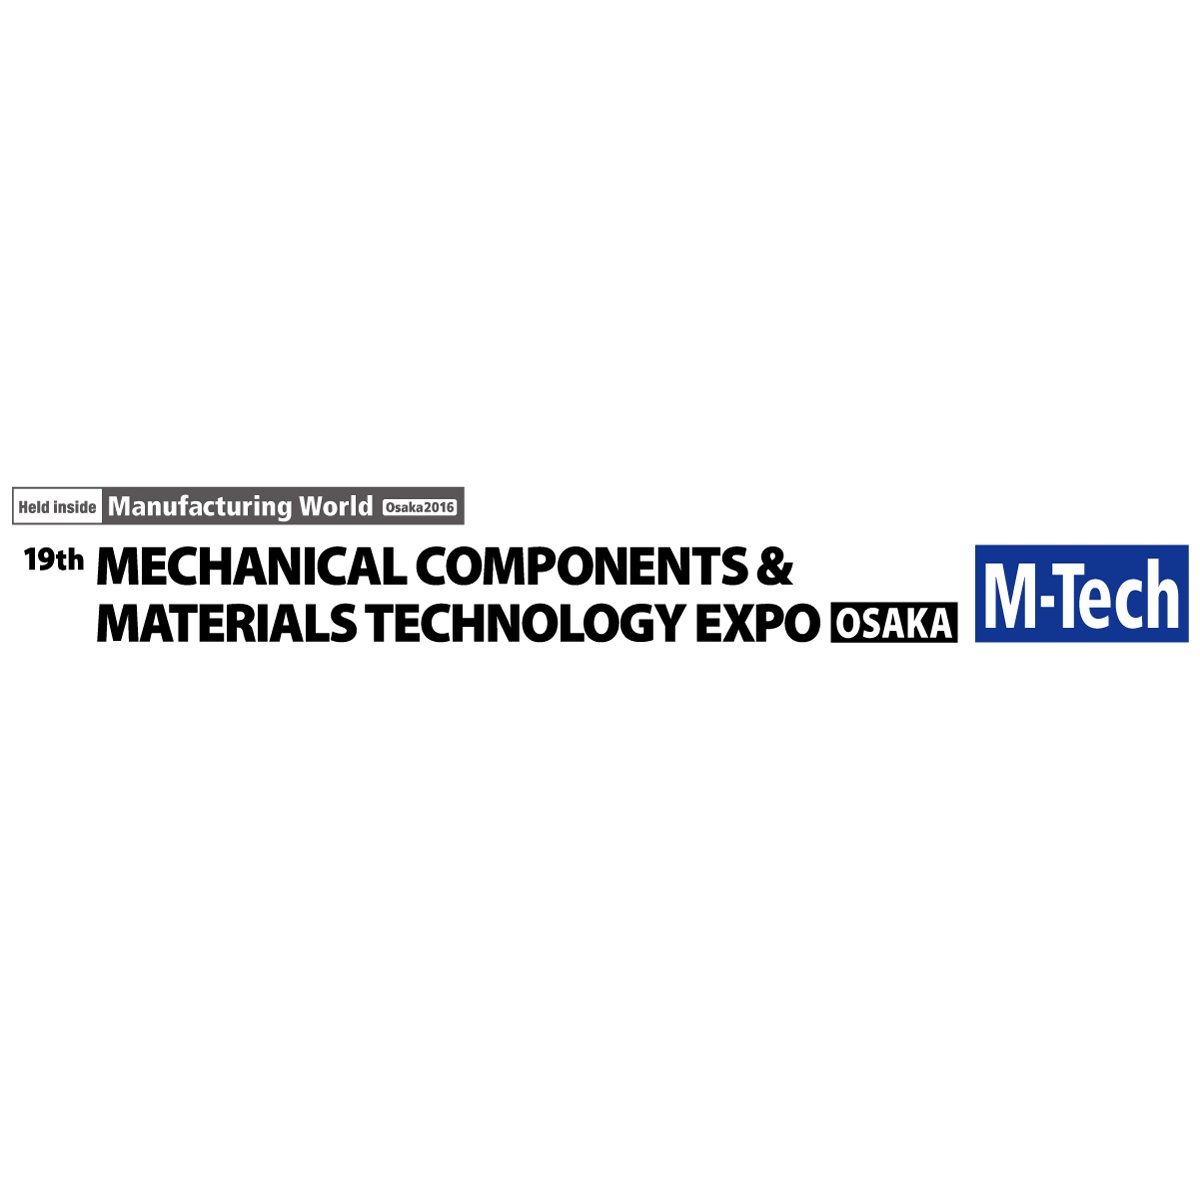 2016 Mechanical Components & Materials Technology Expo (M-Tech)